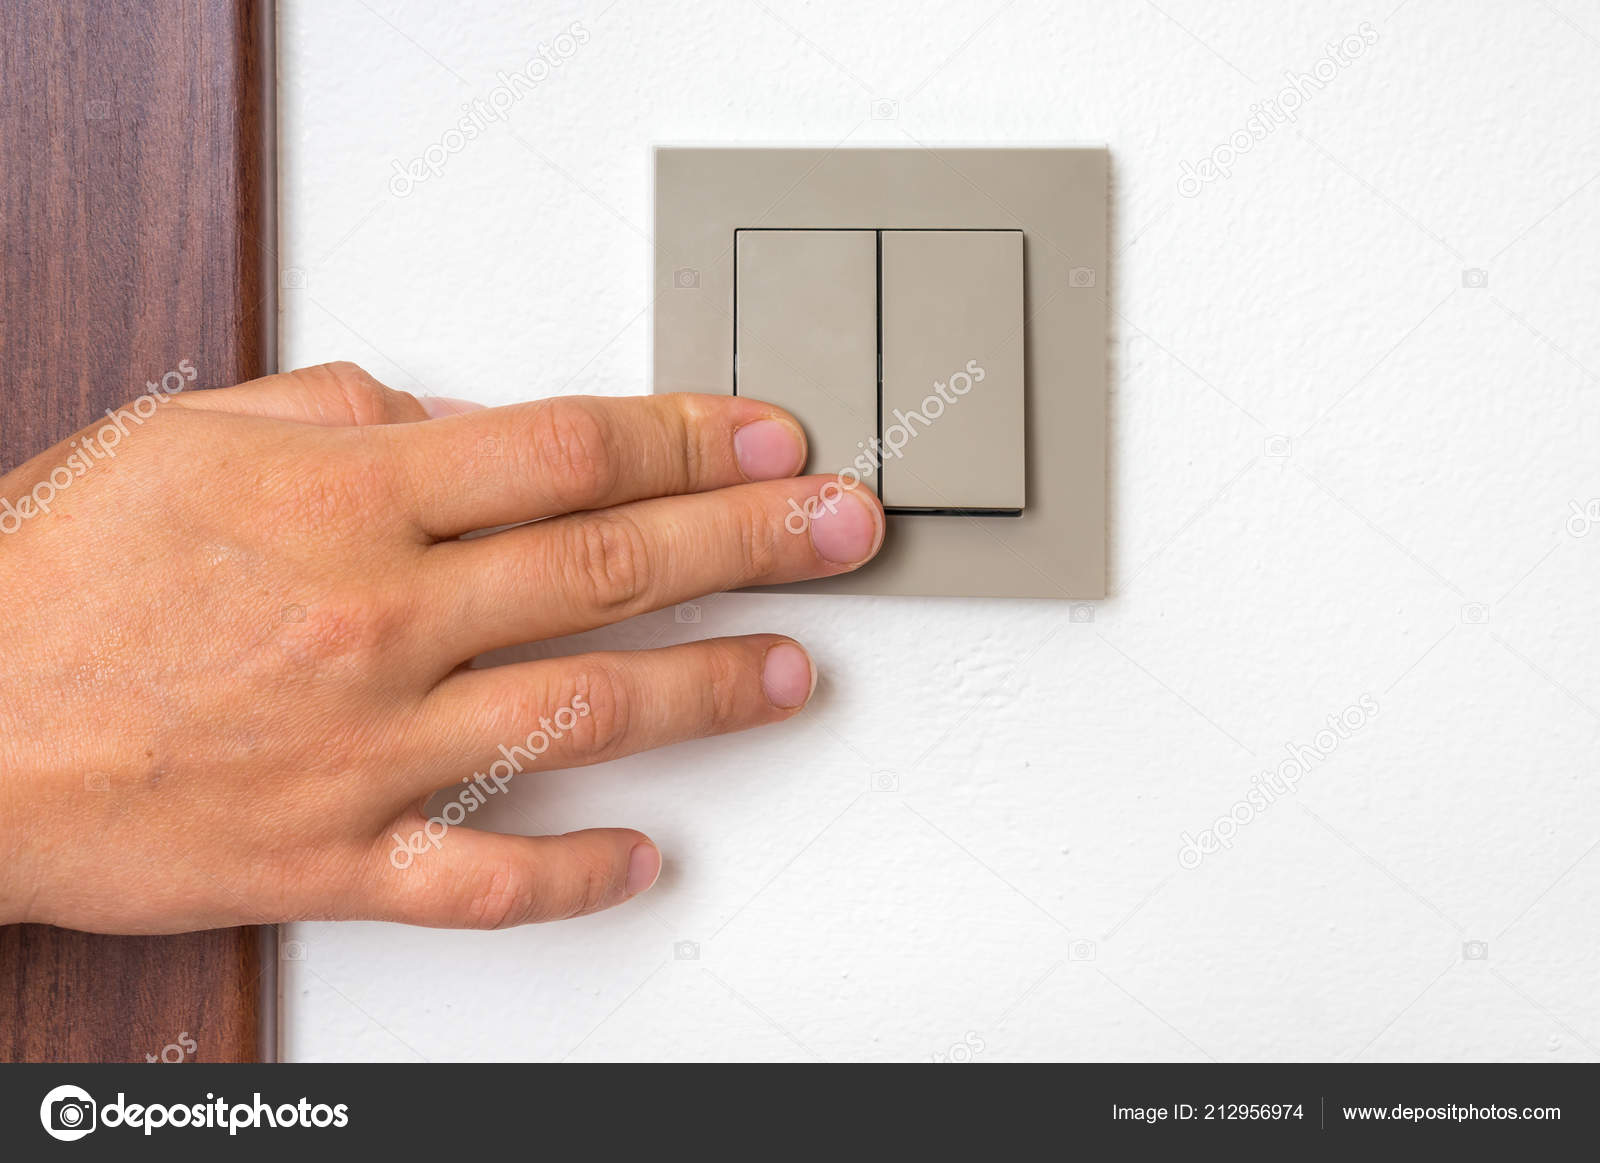 Woman turning on left signal switch, close up shot of her hand